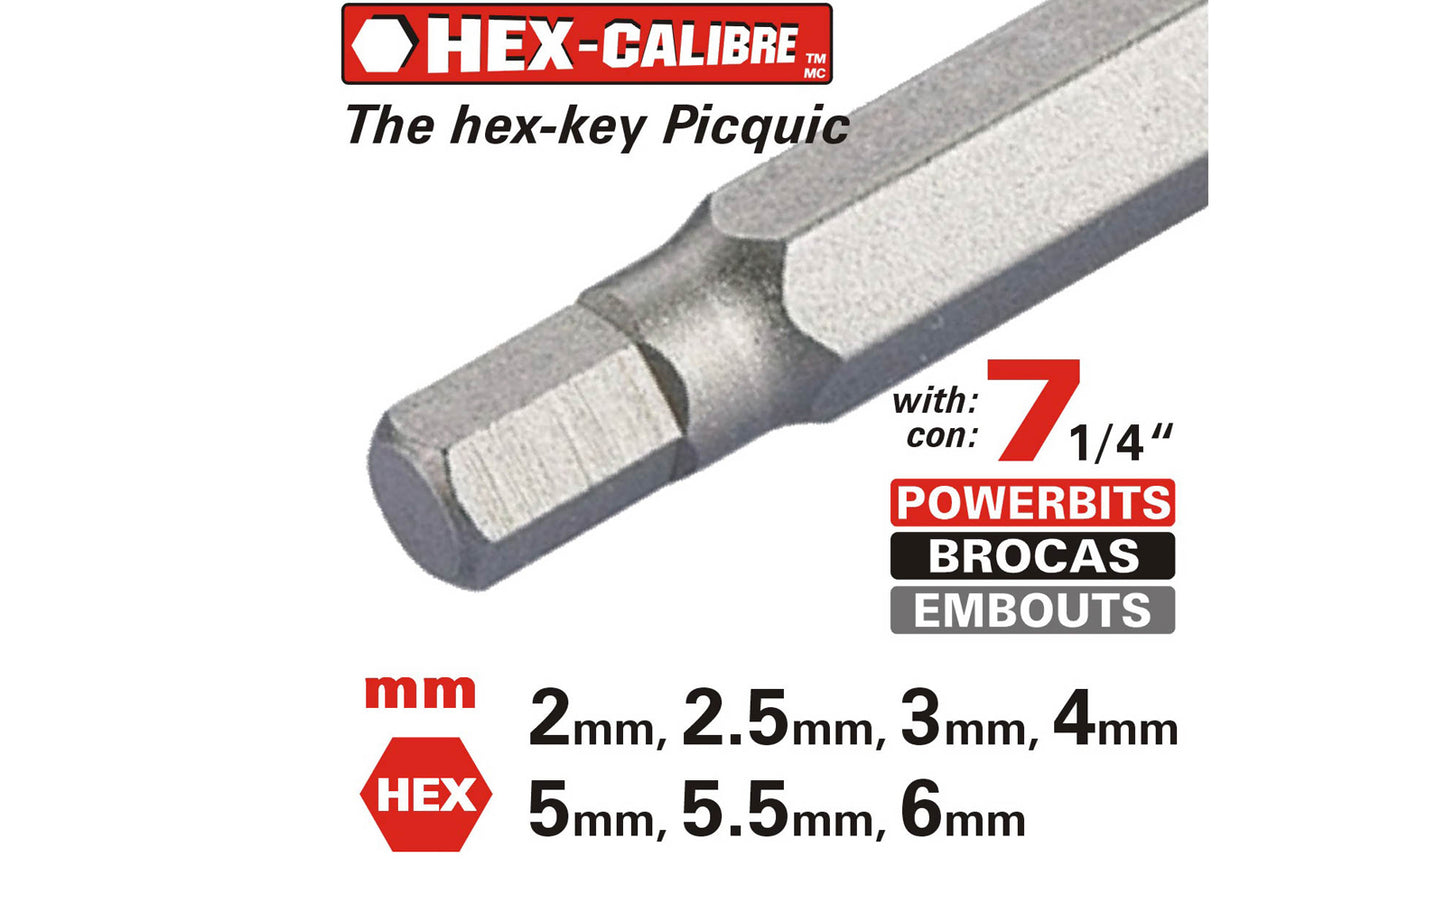 Picquic Model 88153 - Metric "Hex Calibre" with a solid handle for comfort & torque, & has no moving parts. Bits included: 2 mm, 2.5 mm, 3 mm, 4 mm, 5 mm, 5.5 mm, 6 mm size hex bits. Picquic TrueTorx Multi-Bit screwdriver with bit storage in handle. 57369881009. magnetic rare earth magnet holds the working bit in shank